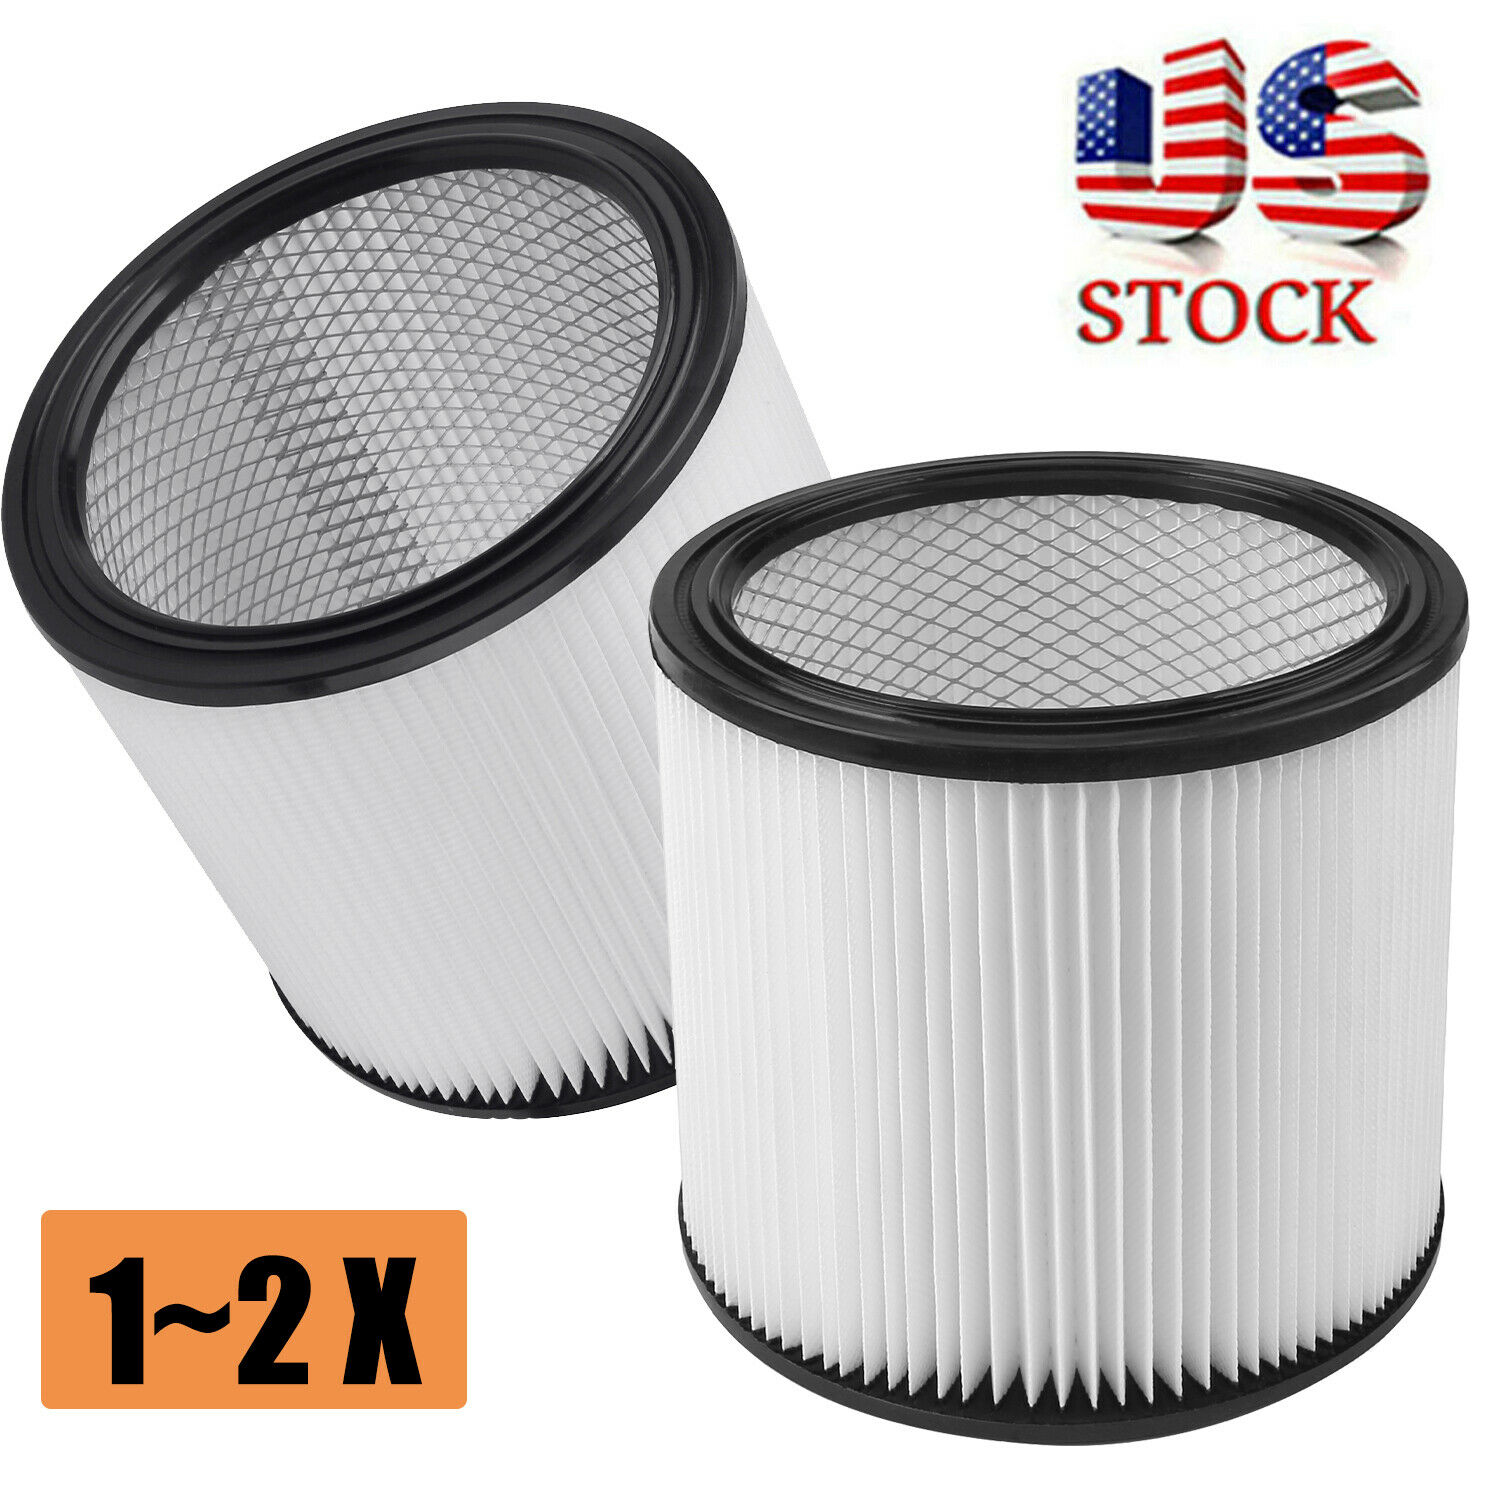 Filter Cartridge For Shop Vac Wet Dry 90304 9030400 903-04-00 9034 Replacement